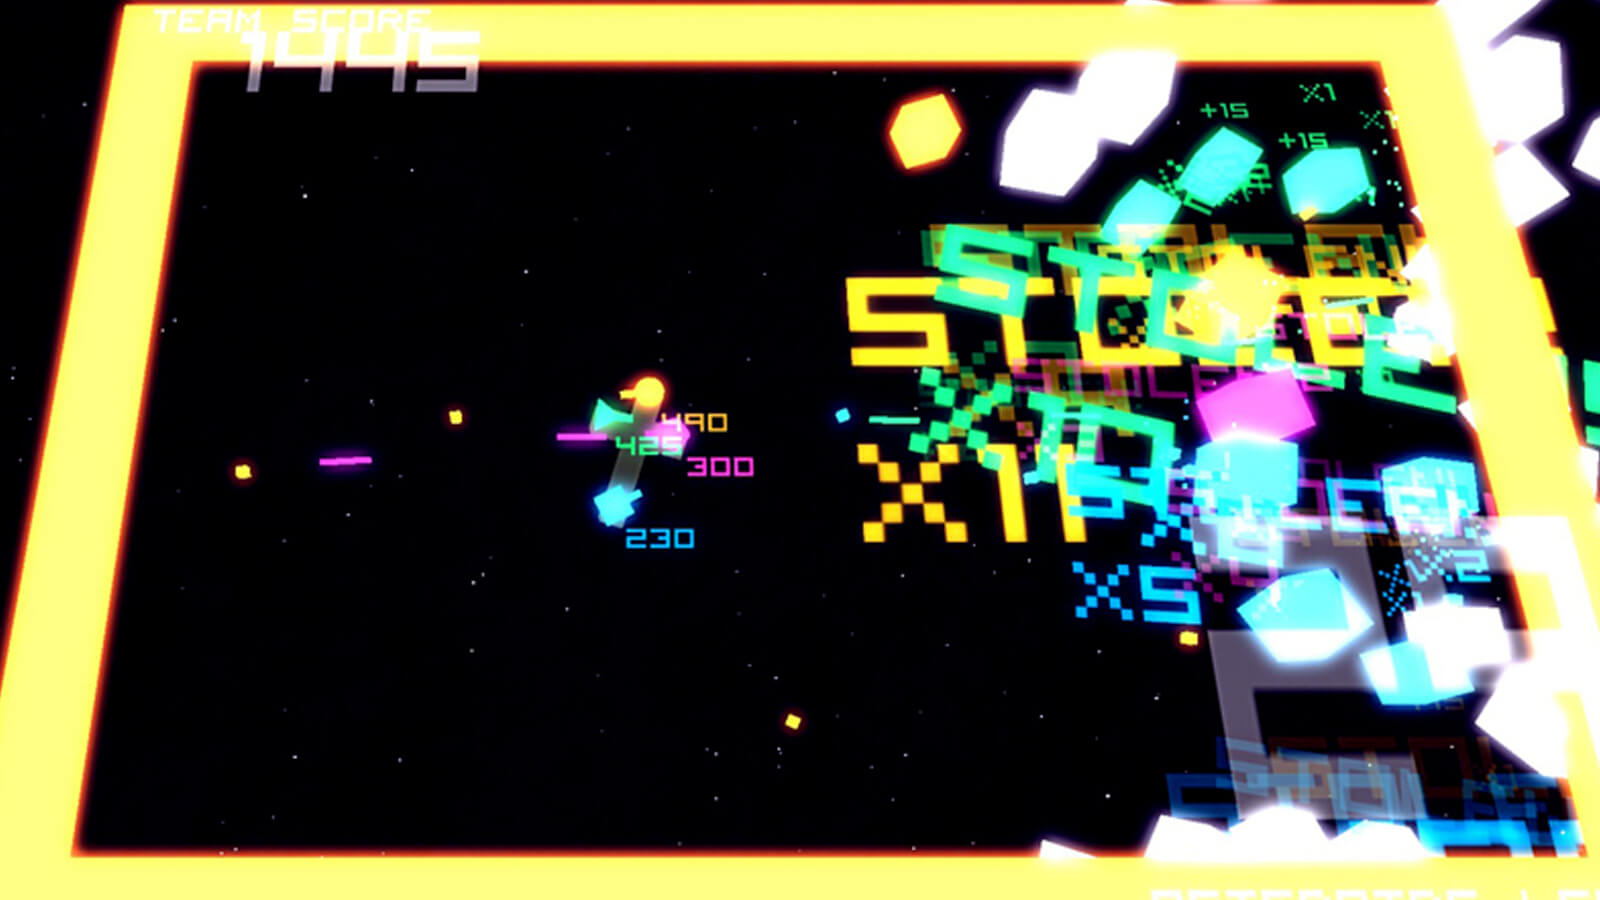 A fleet of glowing cubes approach the players' space ship. 